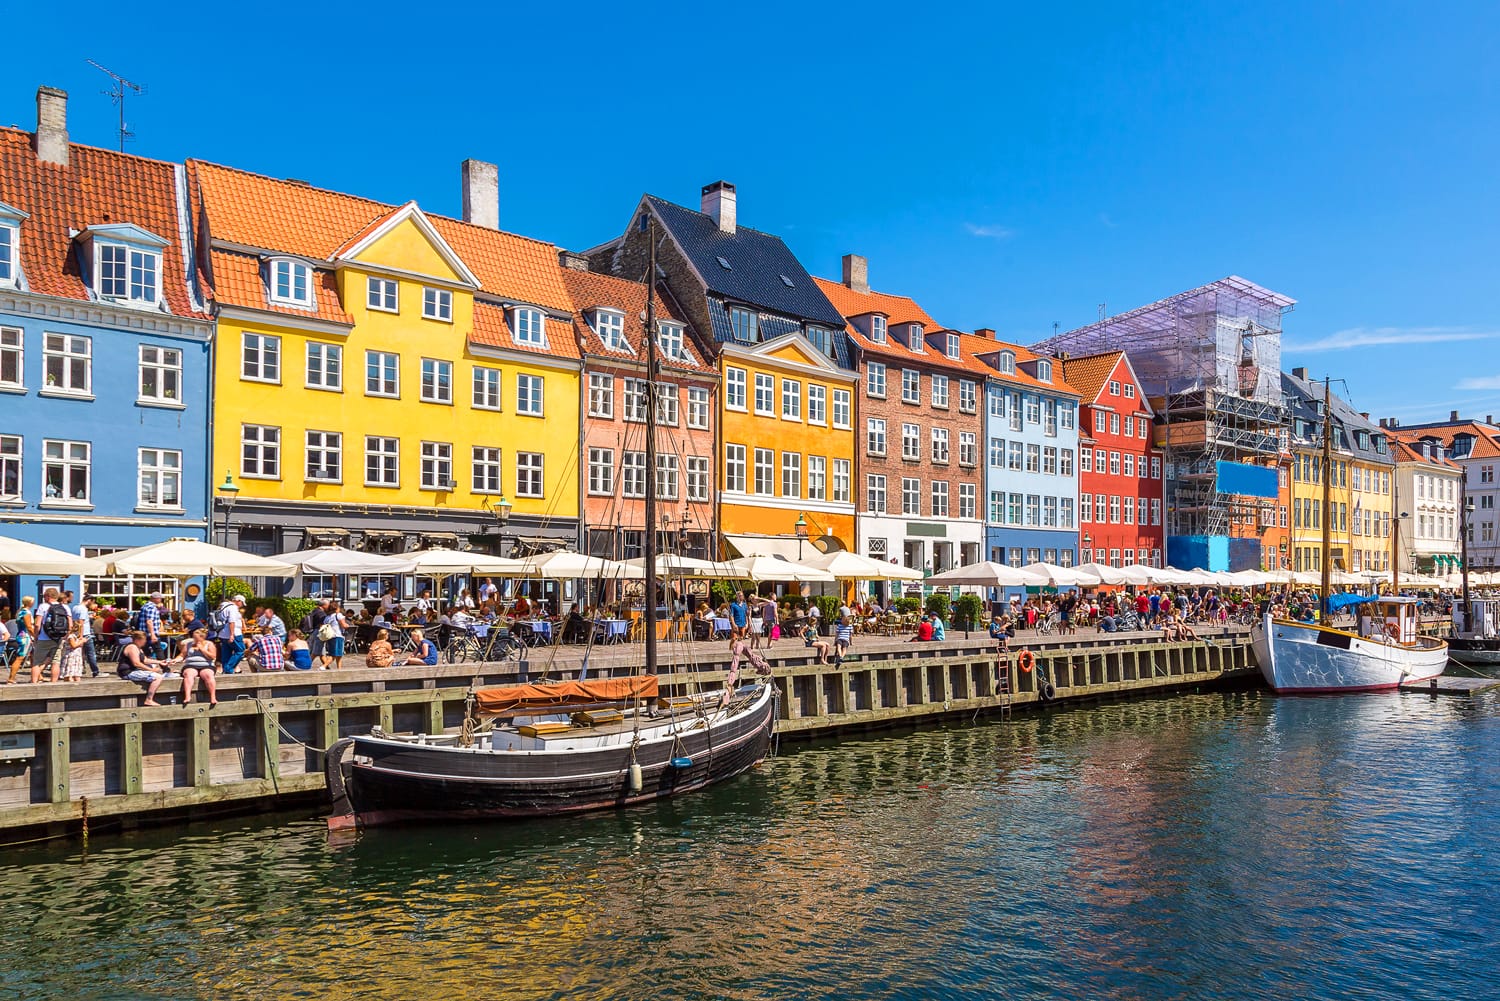 Nyhavn district is one of the most famous landmark in Copenhagen in a summer day